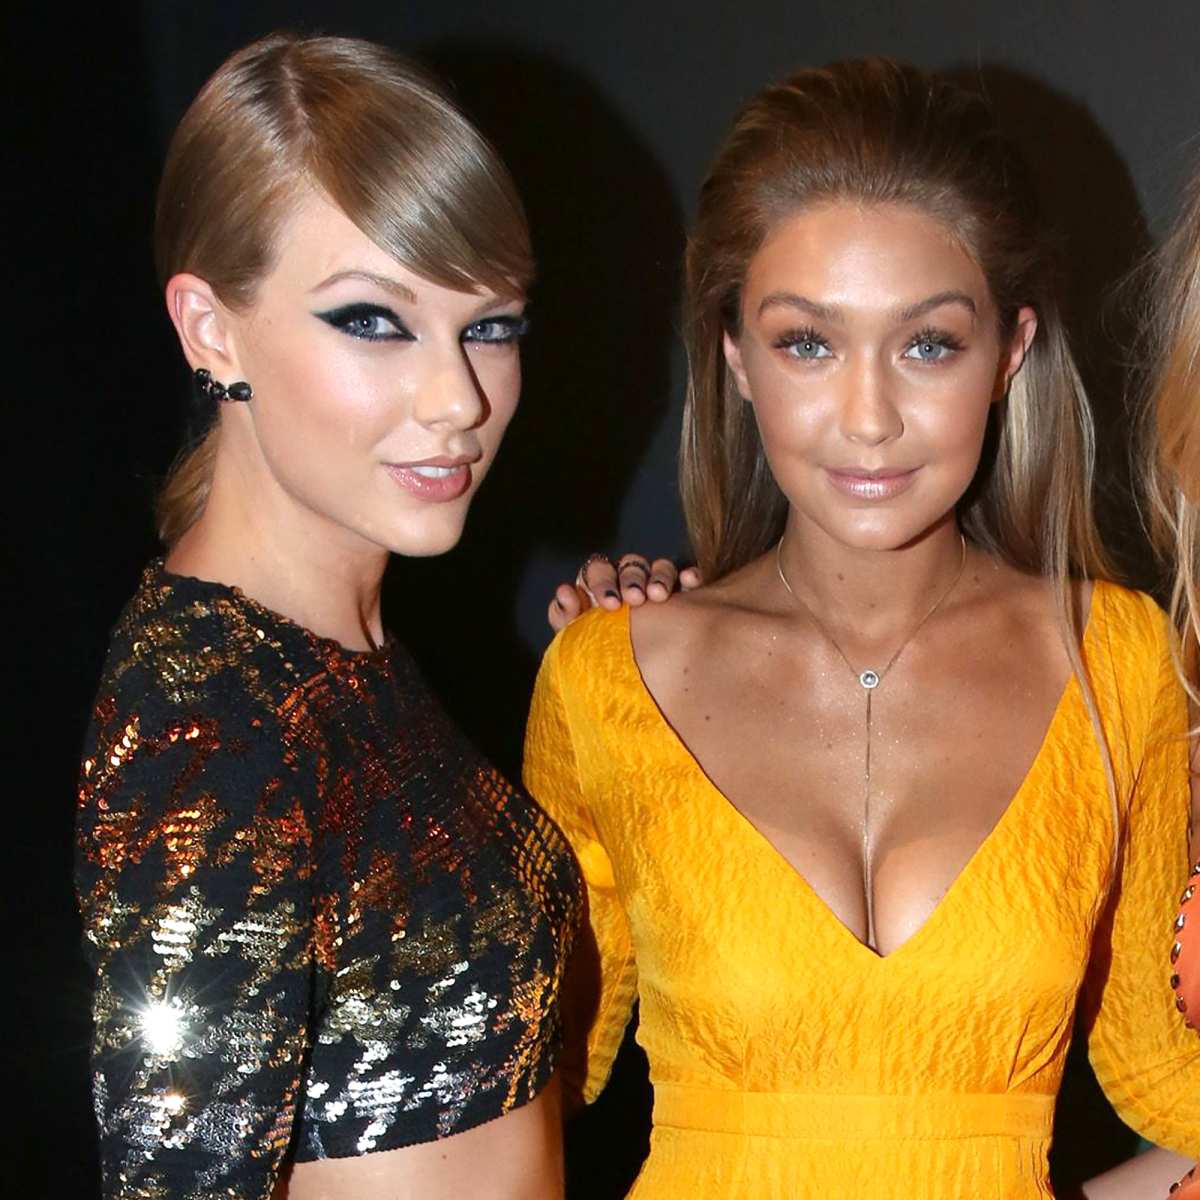 Gigi Hadid Shares New Photo of Daughter With Gift From Taylor Swift